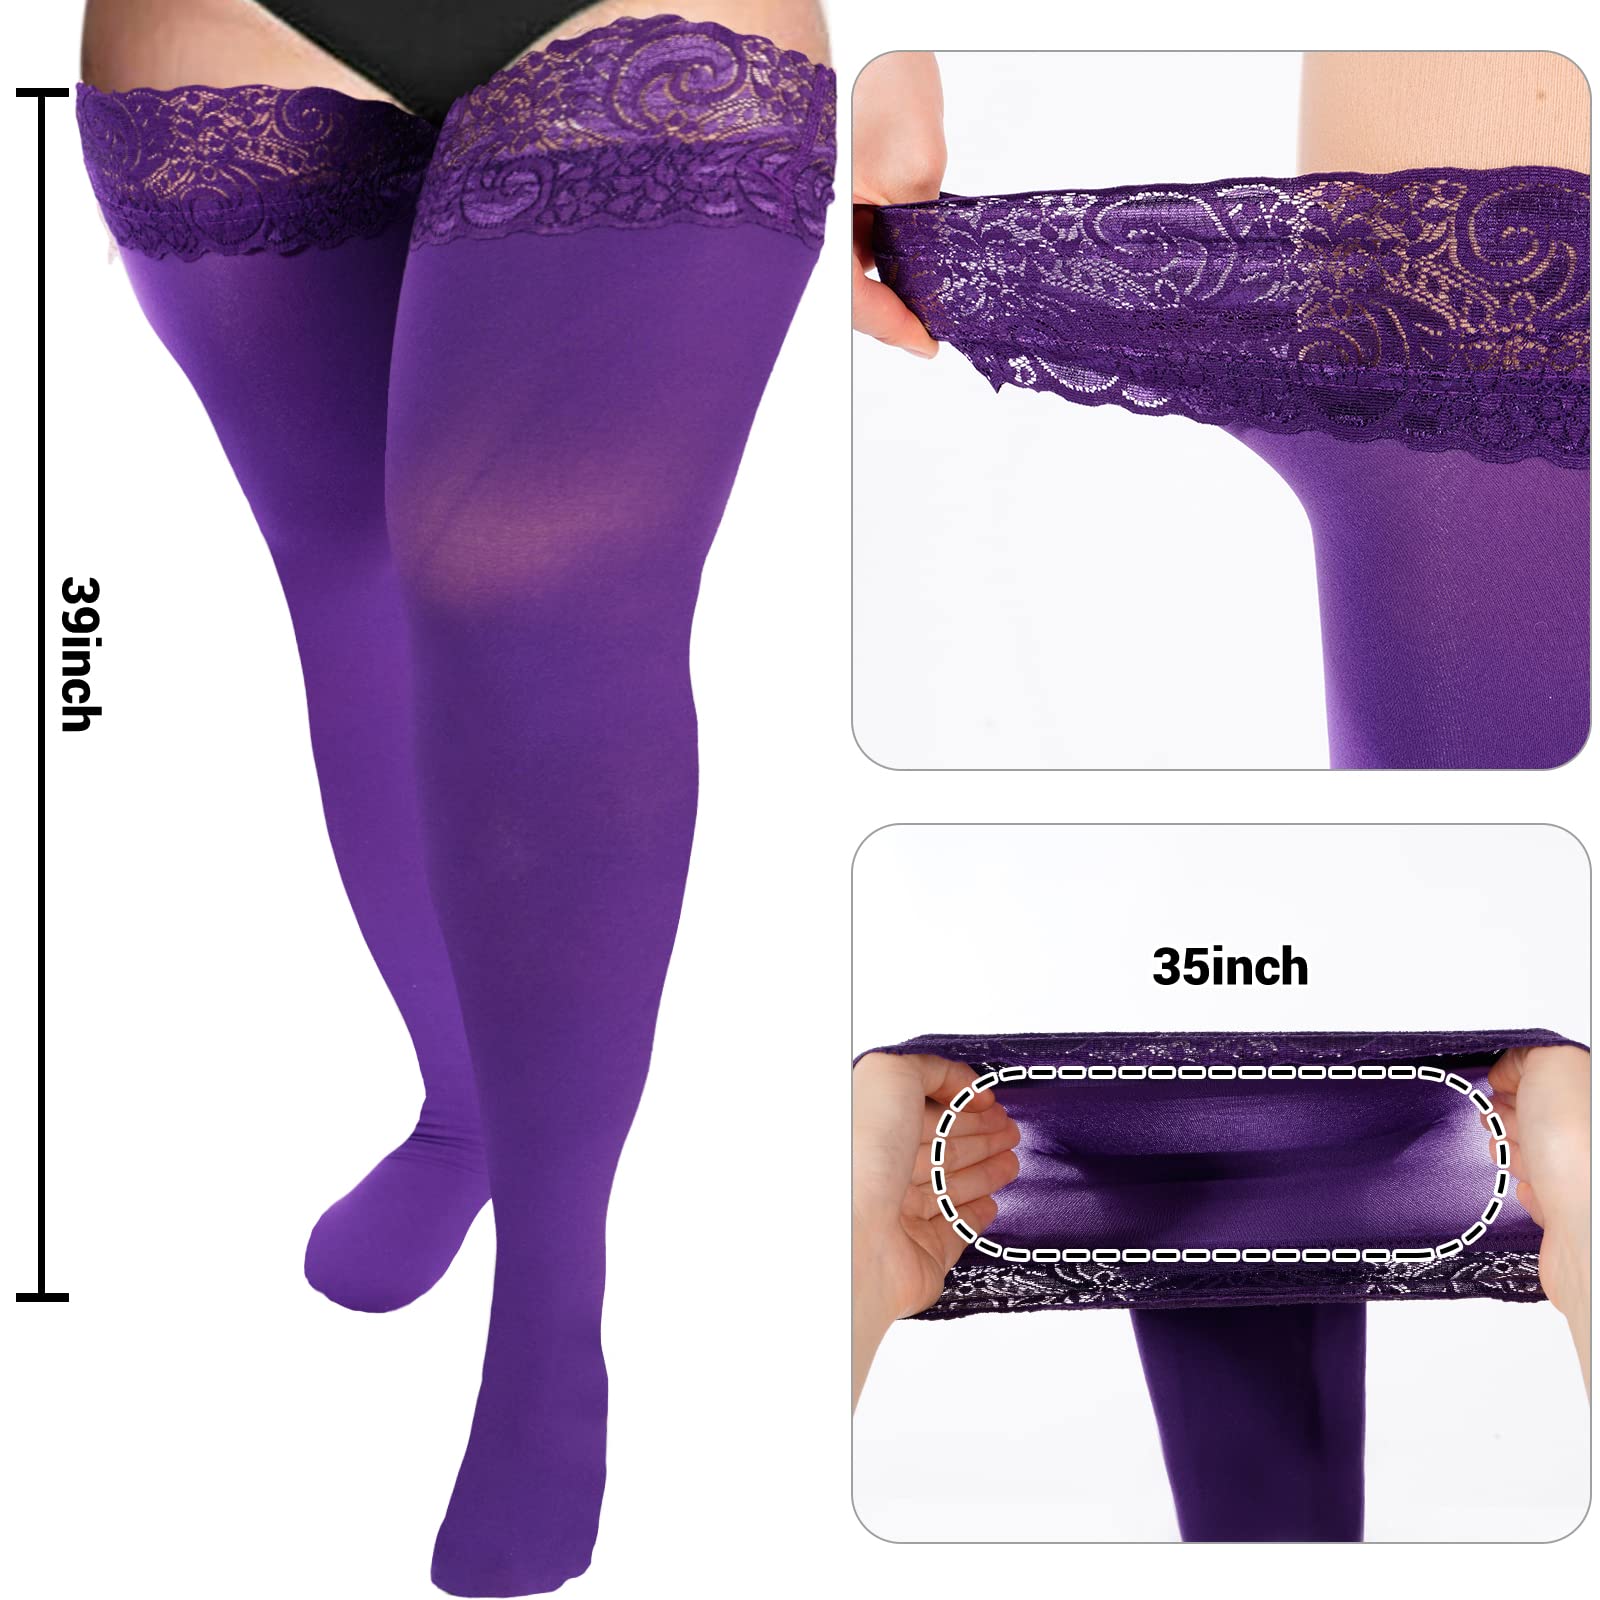 55D Semi Sheer Silicone Lace Stay Up Thigh Highs Pantyhose-Violet - Moon Wood